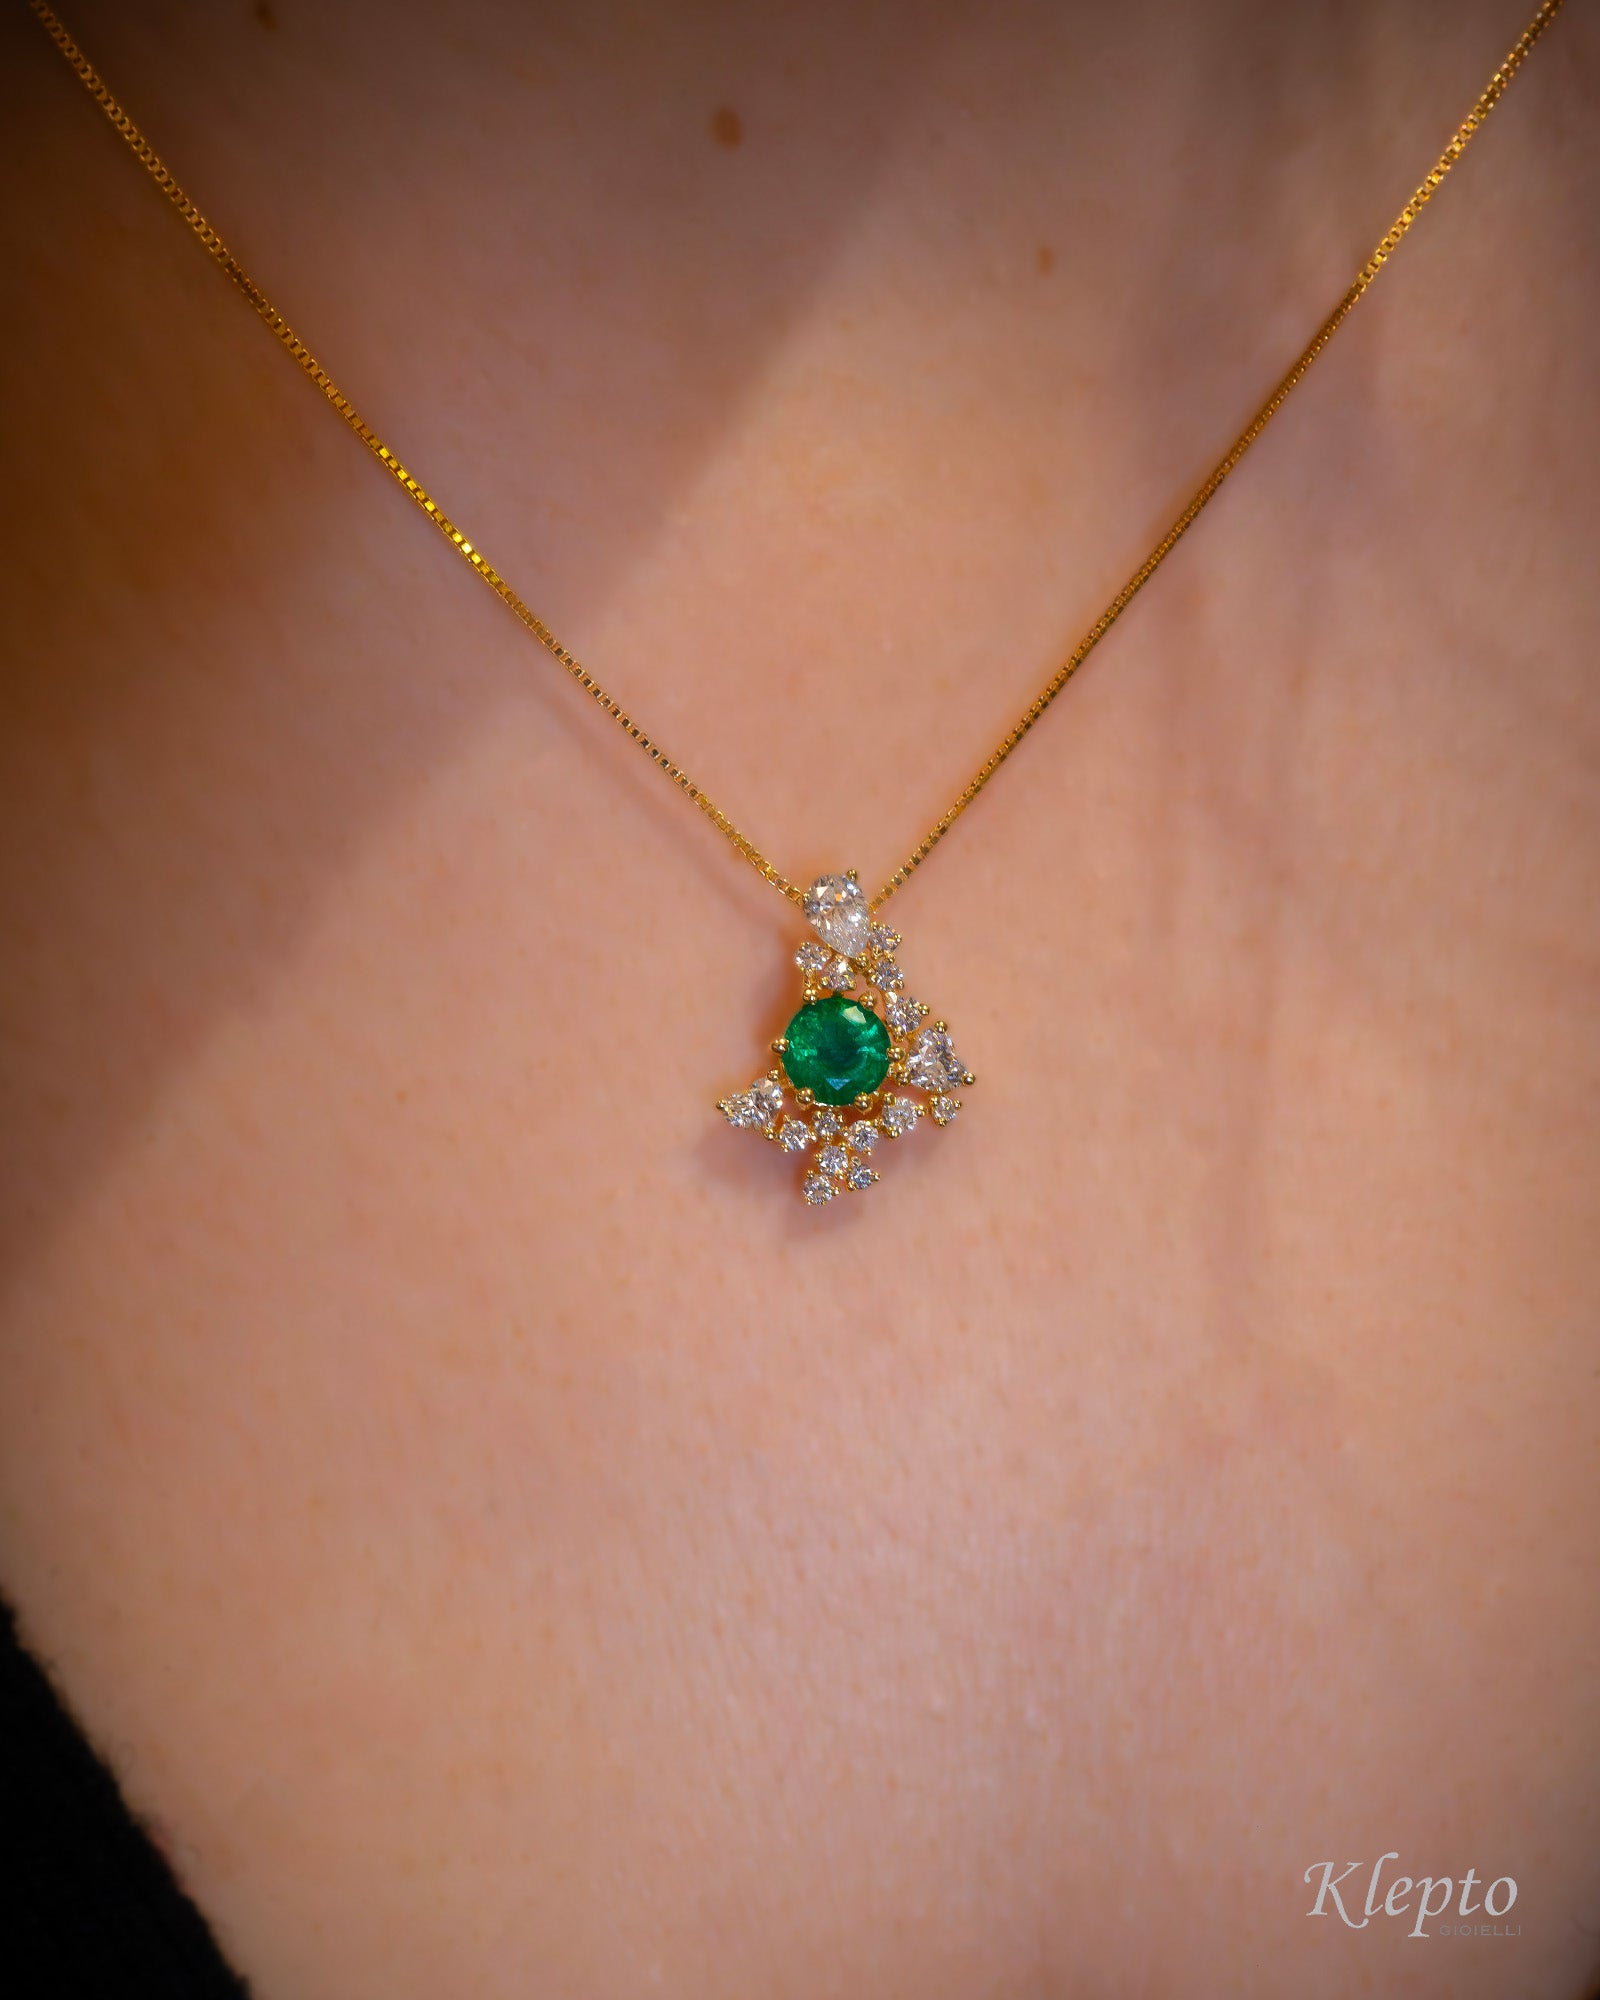 Yellow gold pendant with Emerald and Diamonds